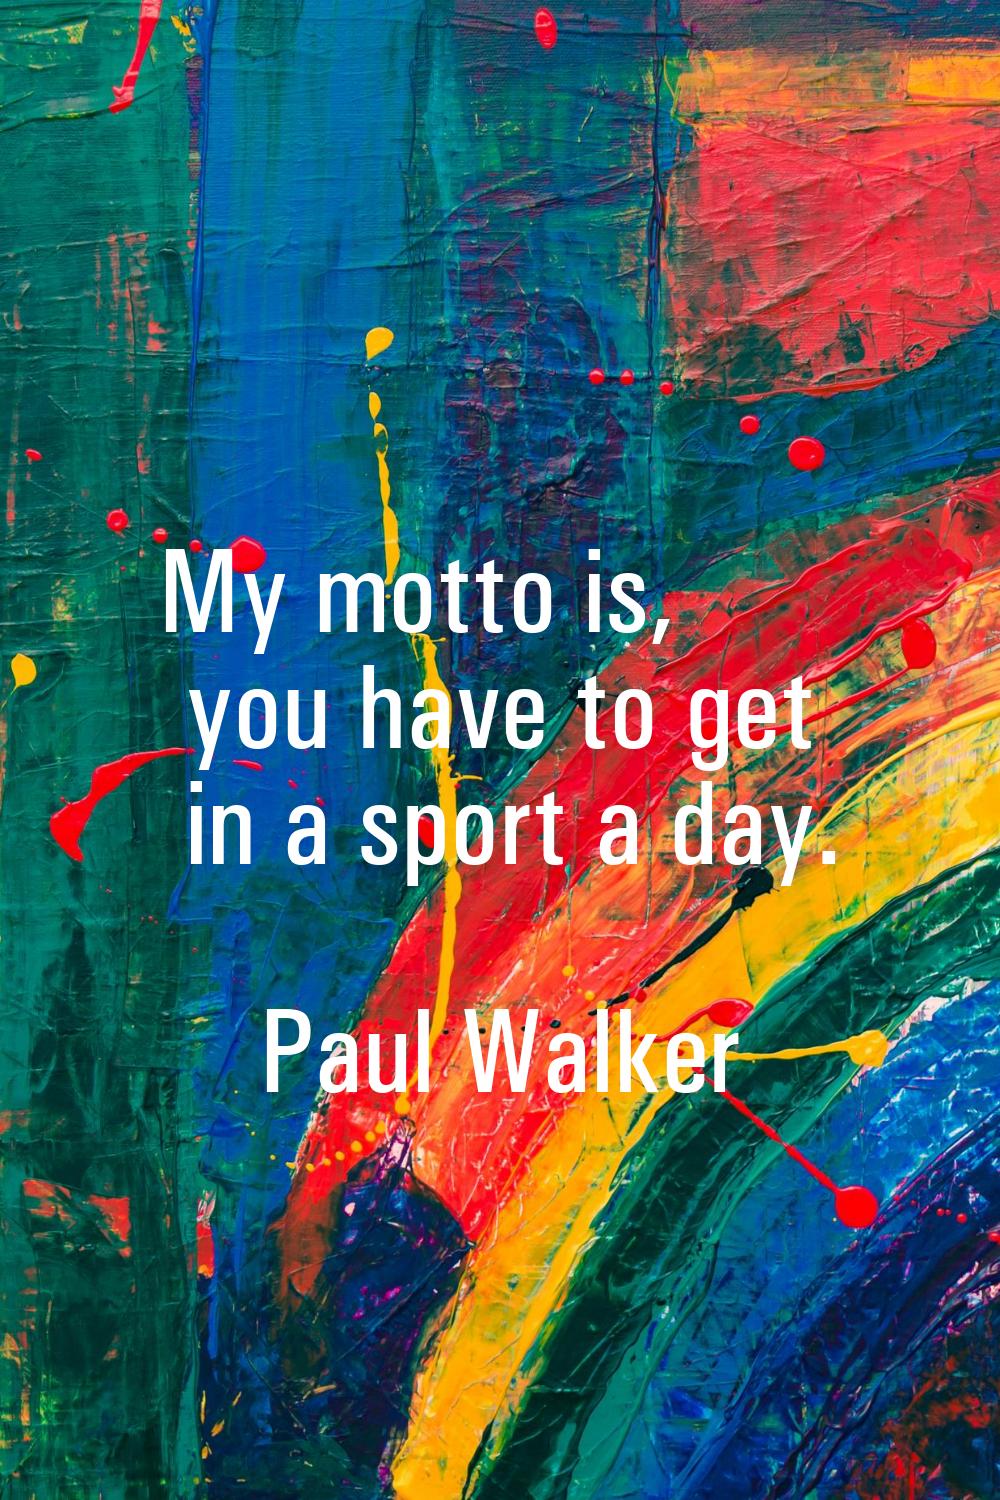 My motto is, you have to get in a sport a day.